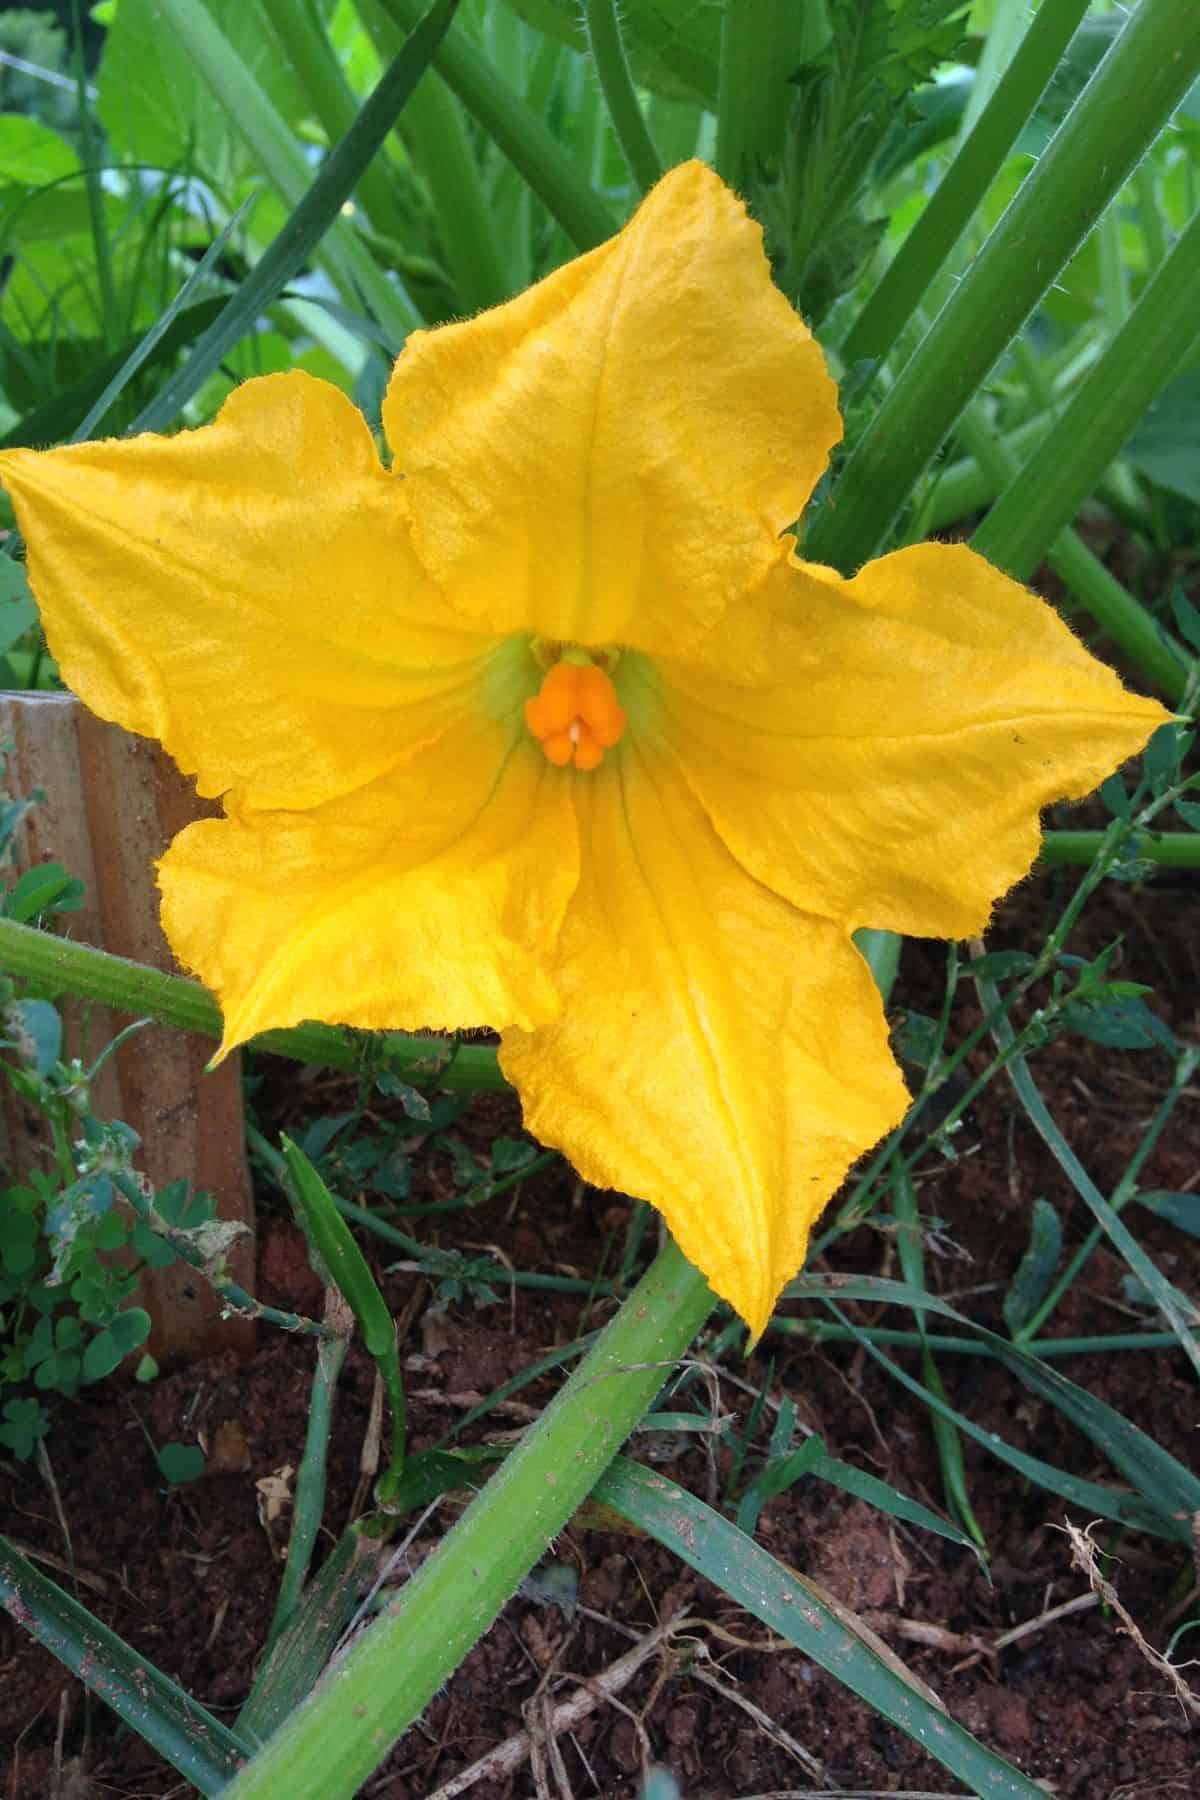 Yellow squash flower bloom on the plant.